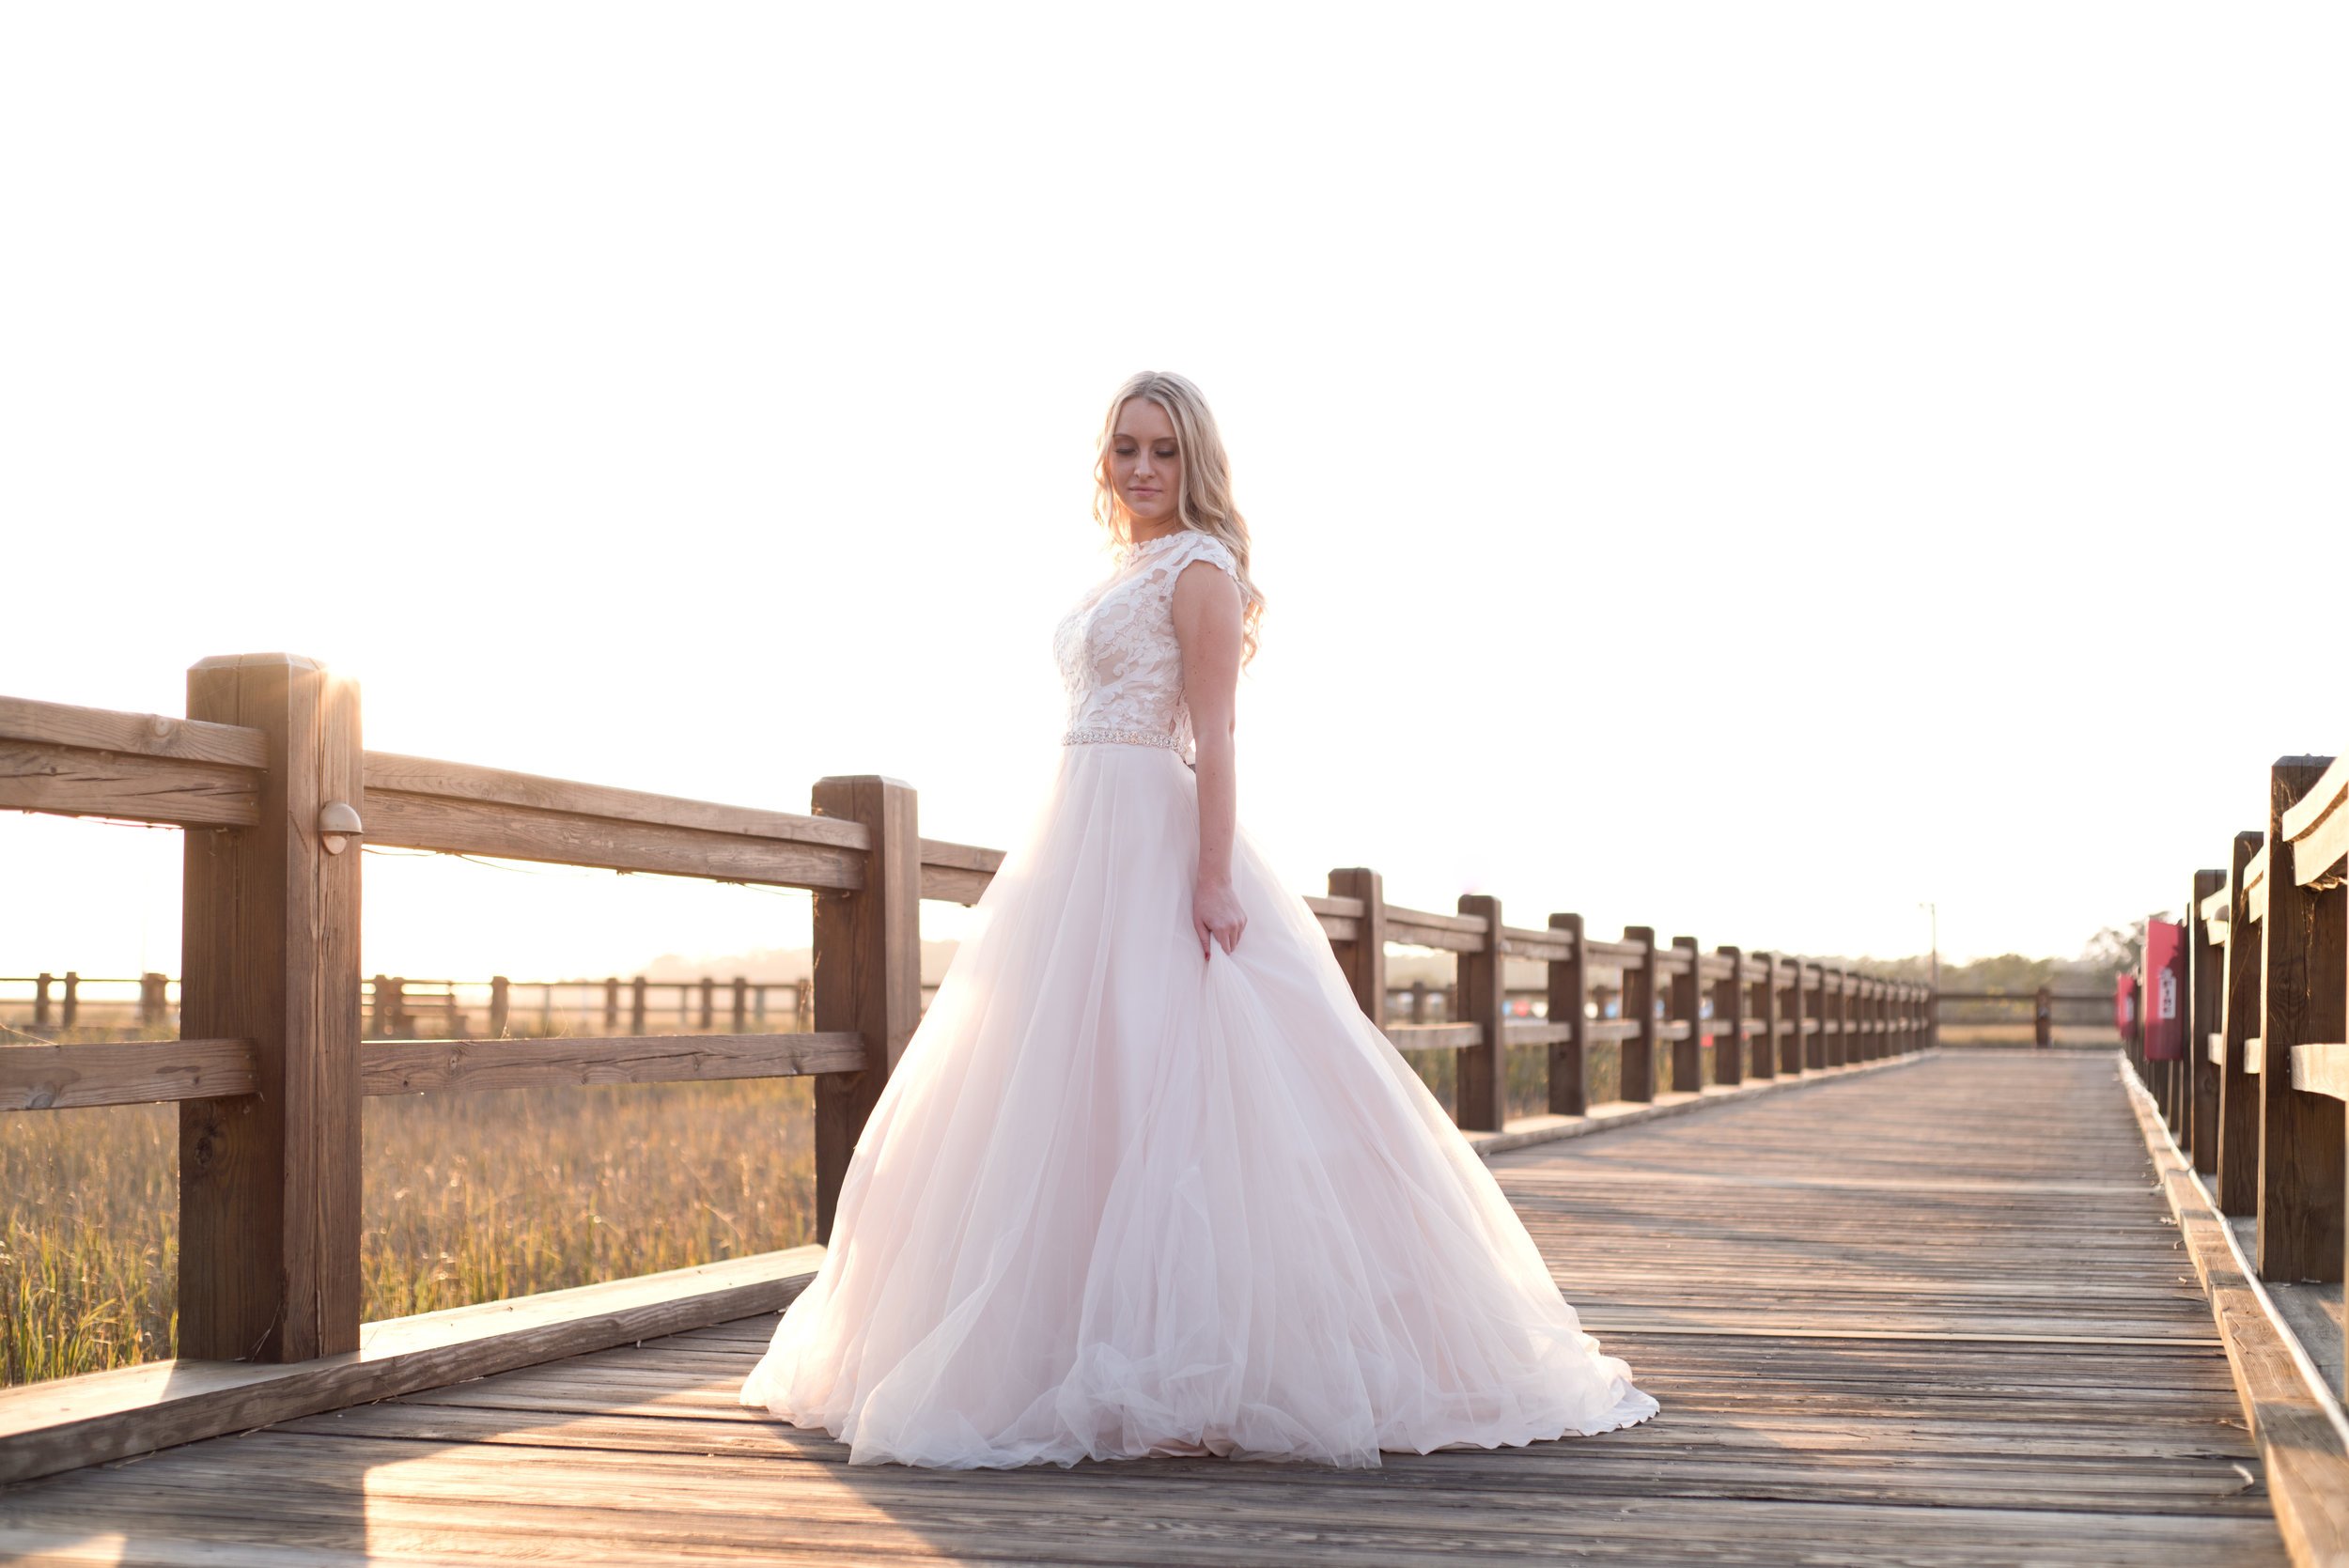 Ivory-and-Beau-bridal-boutique-Delegal-Marina-Samba-to-the-Sea-Photography-carrie-maggie-sottero-rebecca-ingram-bridal-savannah-bridal-boutique-savannah-weddings-marsh-wedding-georgia-wedding-savannah-wedding-sunset-wedding-savannah-wedding-gowns-1.jpg